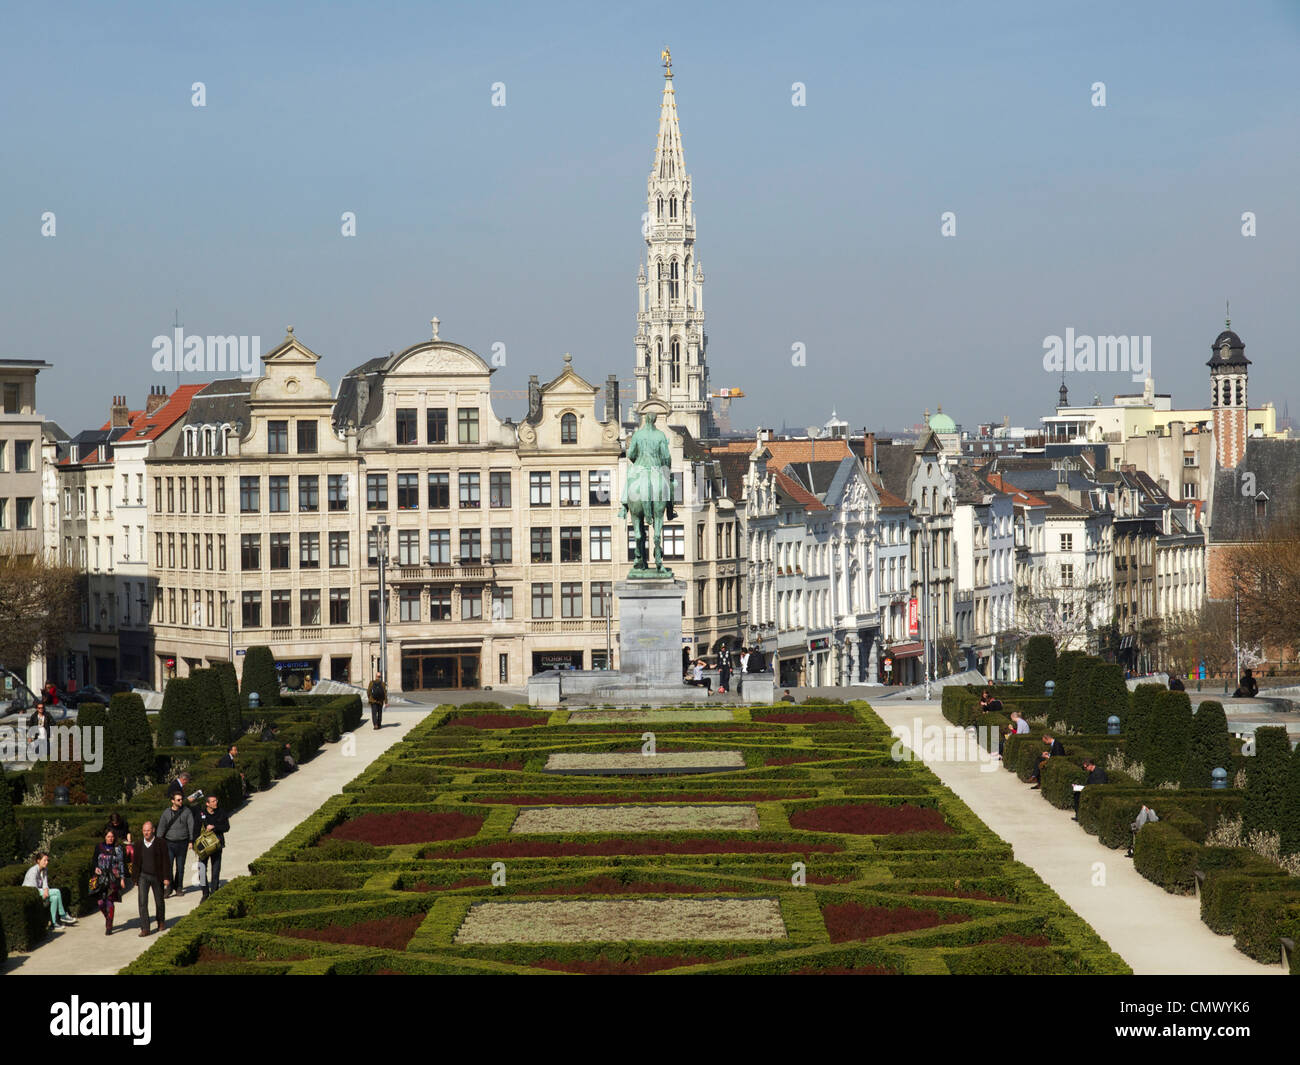 the Kunstberg park with people walking and relaxing with the city centre in the background, Brussels, Belgium Stock Photo